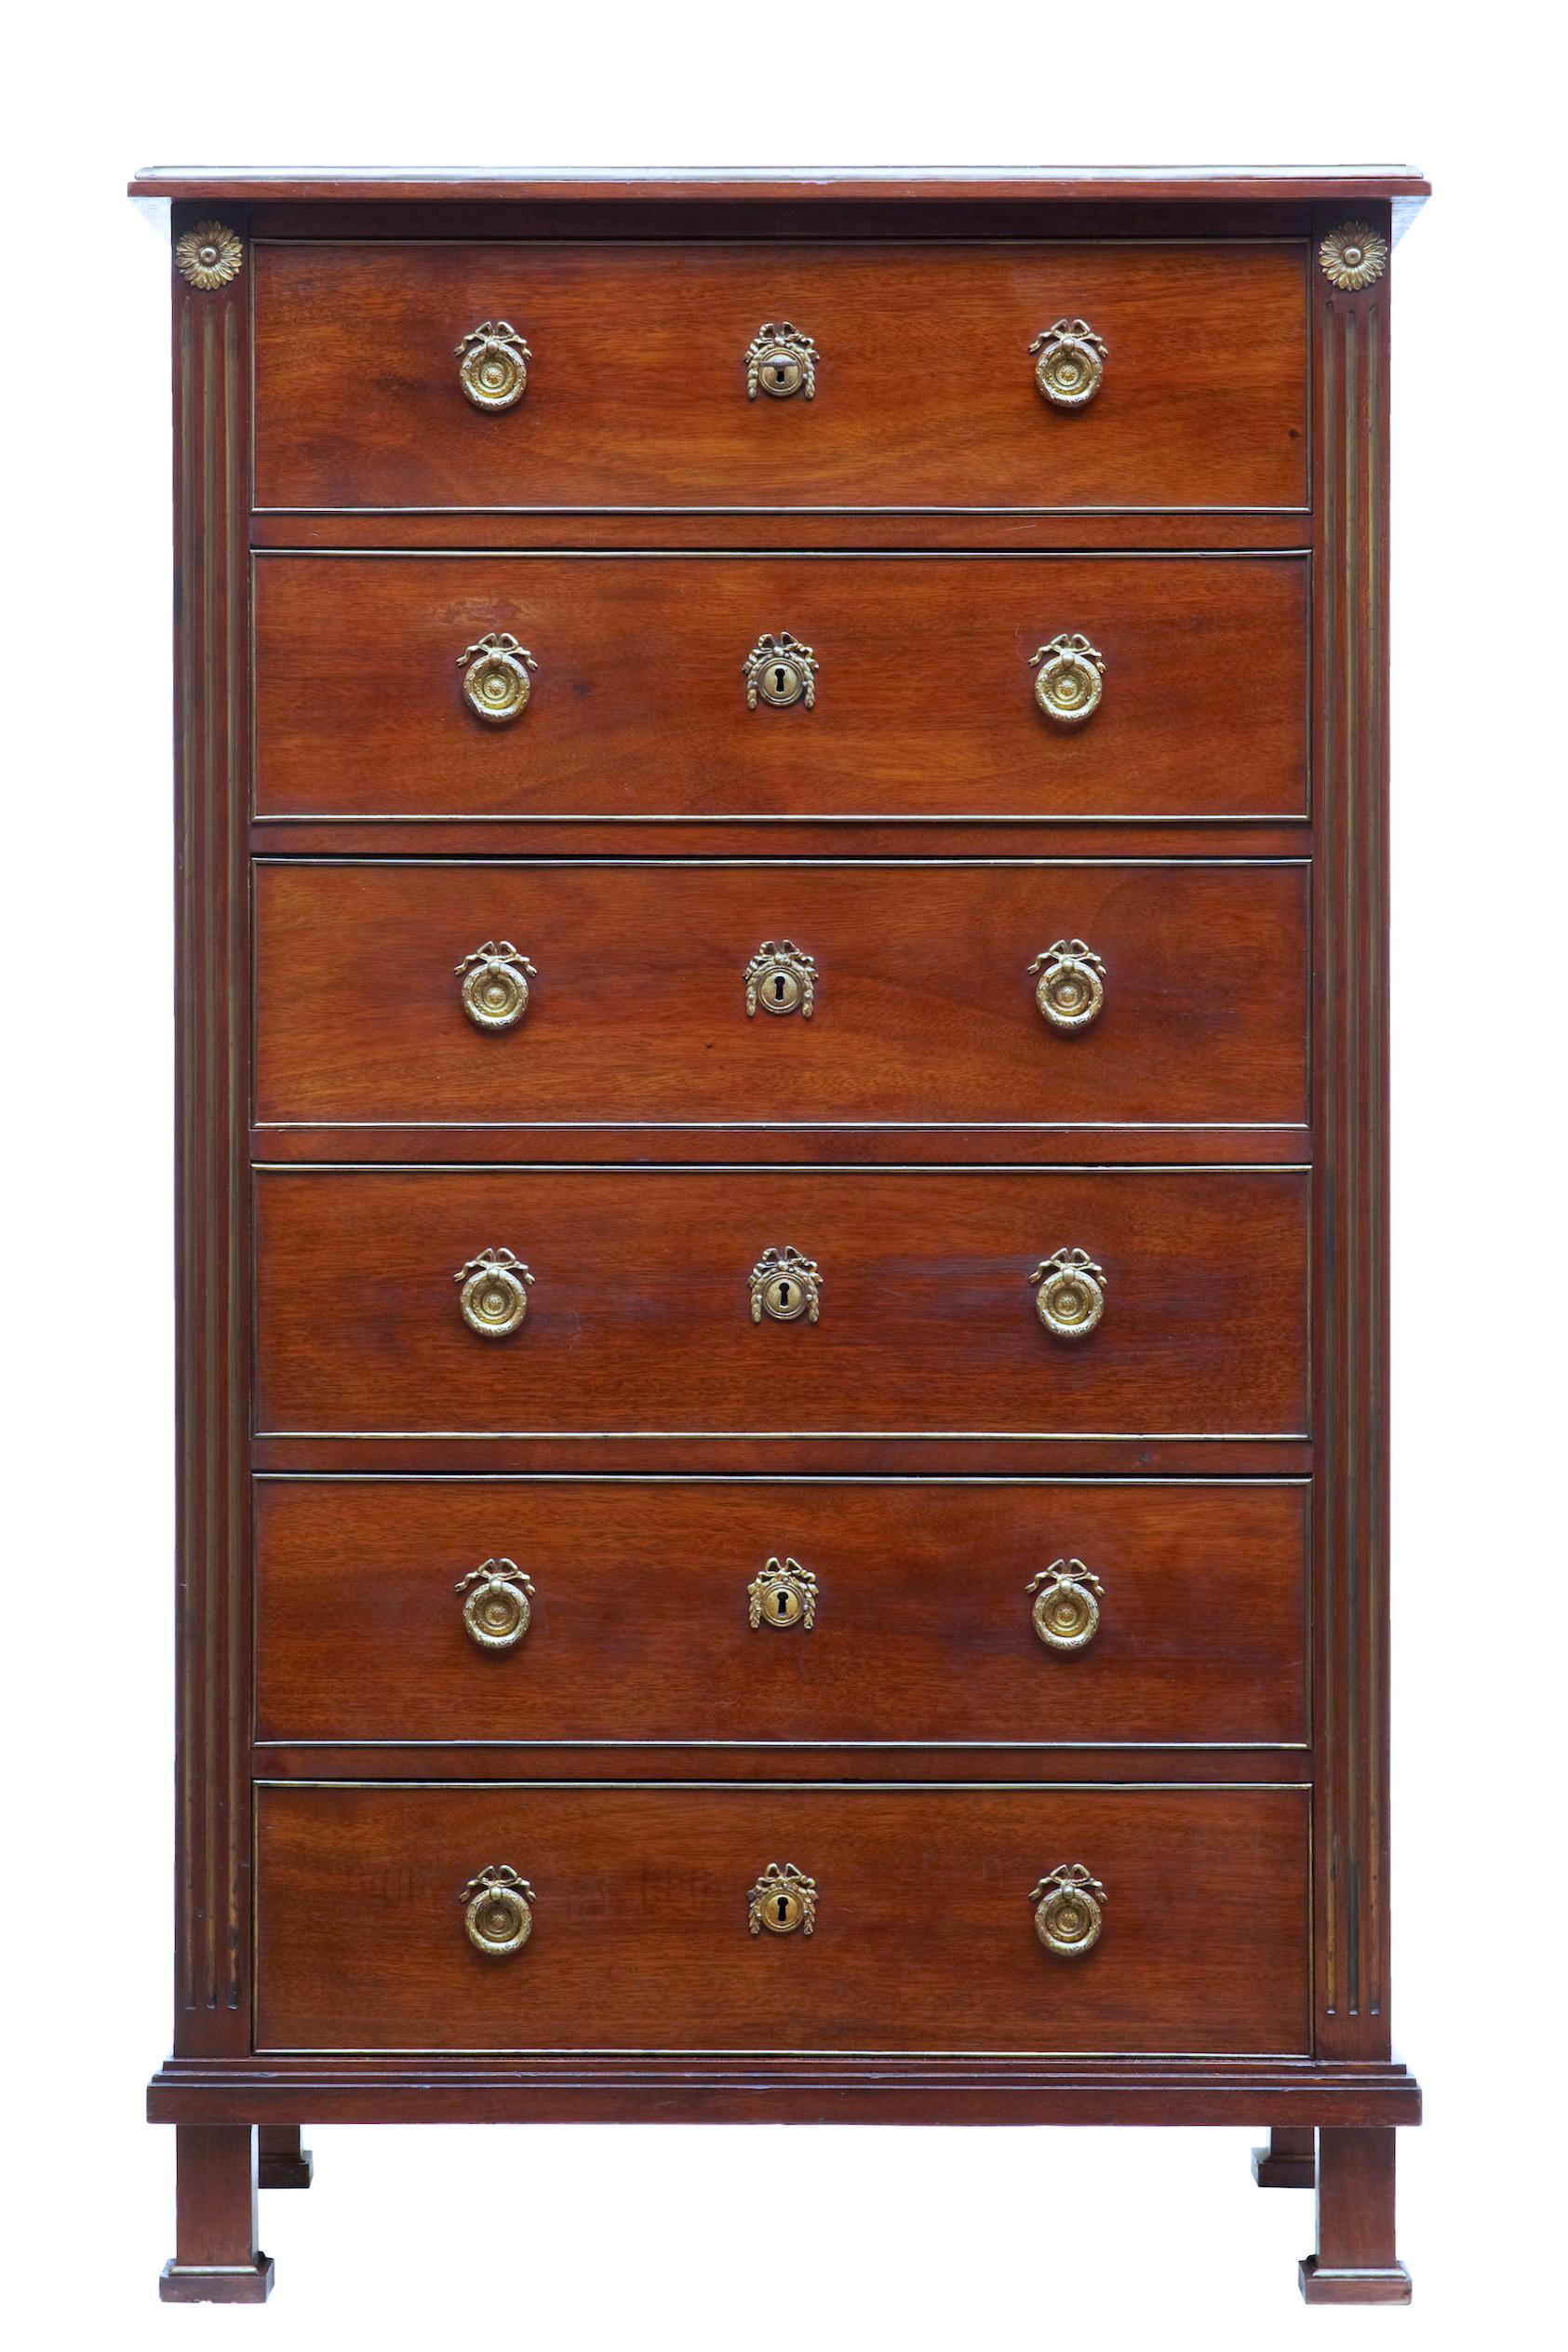 19th century directoire influenced mahogany tall chest of drawers, circa 1860.

Fine quality tall chest in the directoire style. Fitted with 6 drawers of equal proportions and detailed with cock beaded edging. Original ornate handles and key